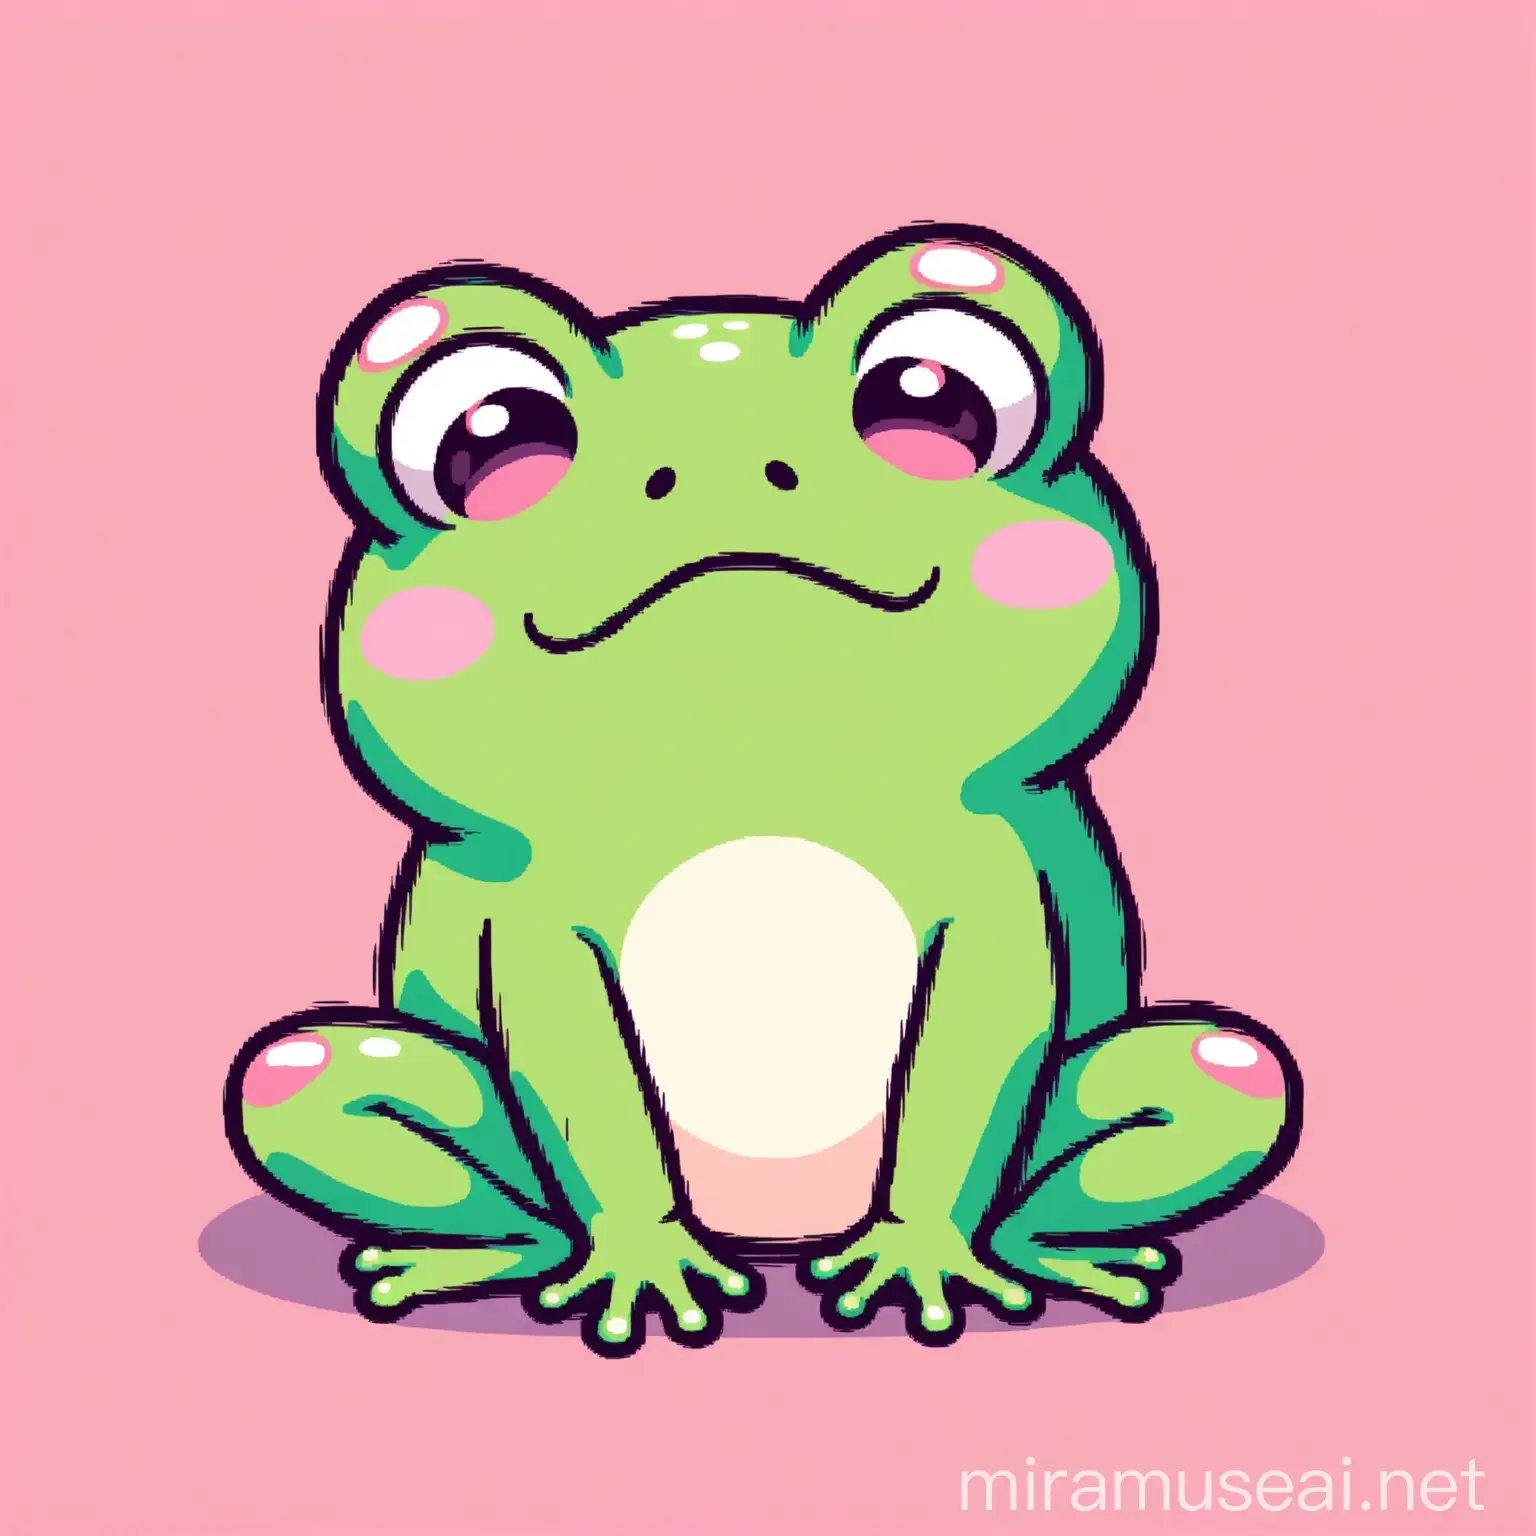 Anxious Frog in Kawaii Style with Green and Pink Palette